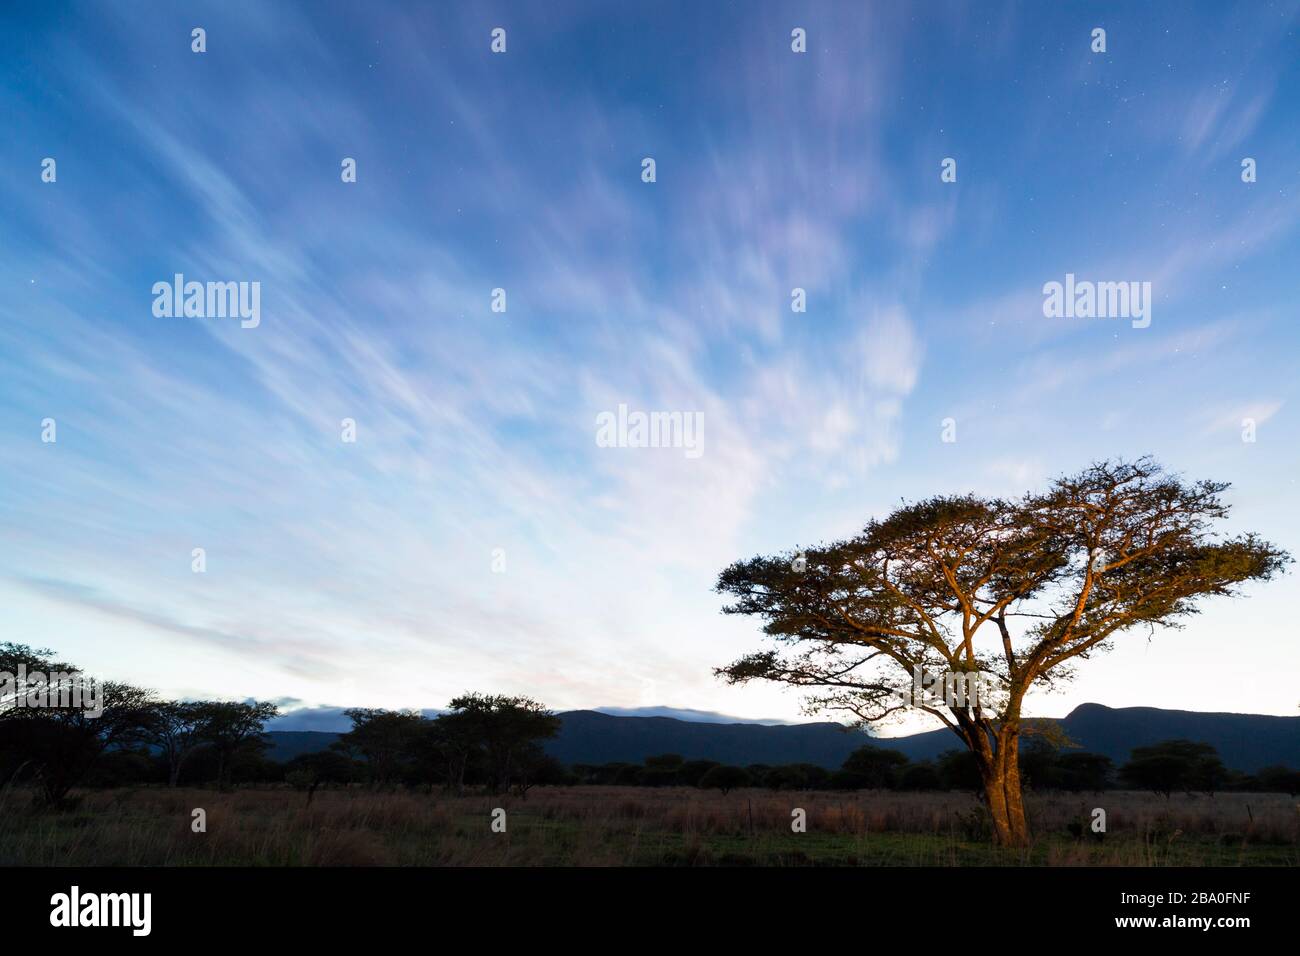 Acasia tree at blue hour Stock Photo